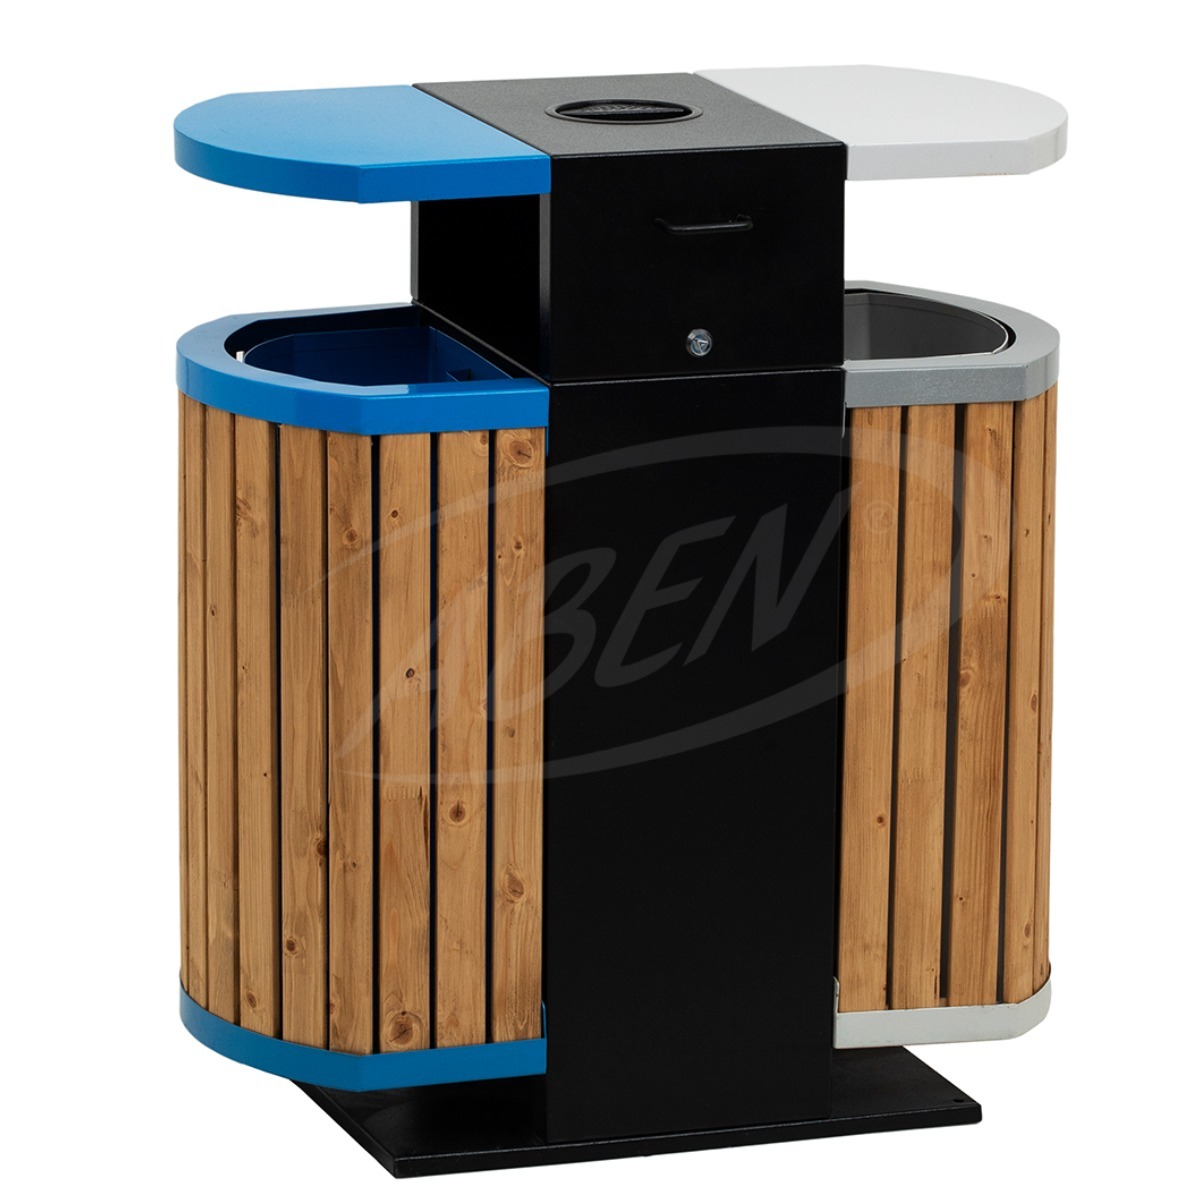 AB-521 Wood Open Space Trash Can product logo